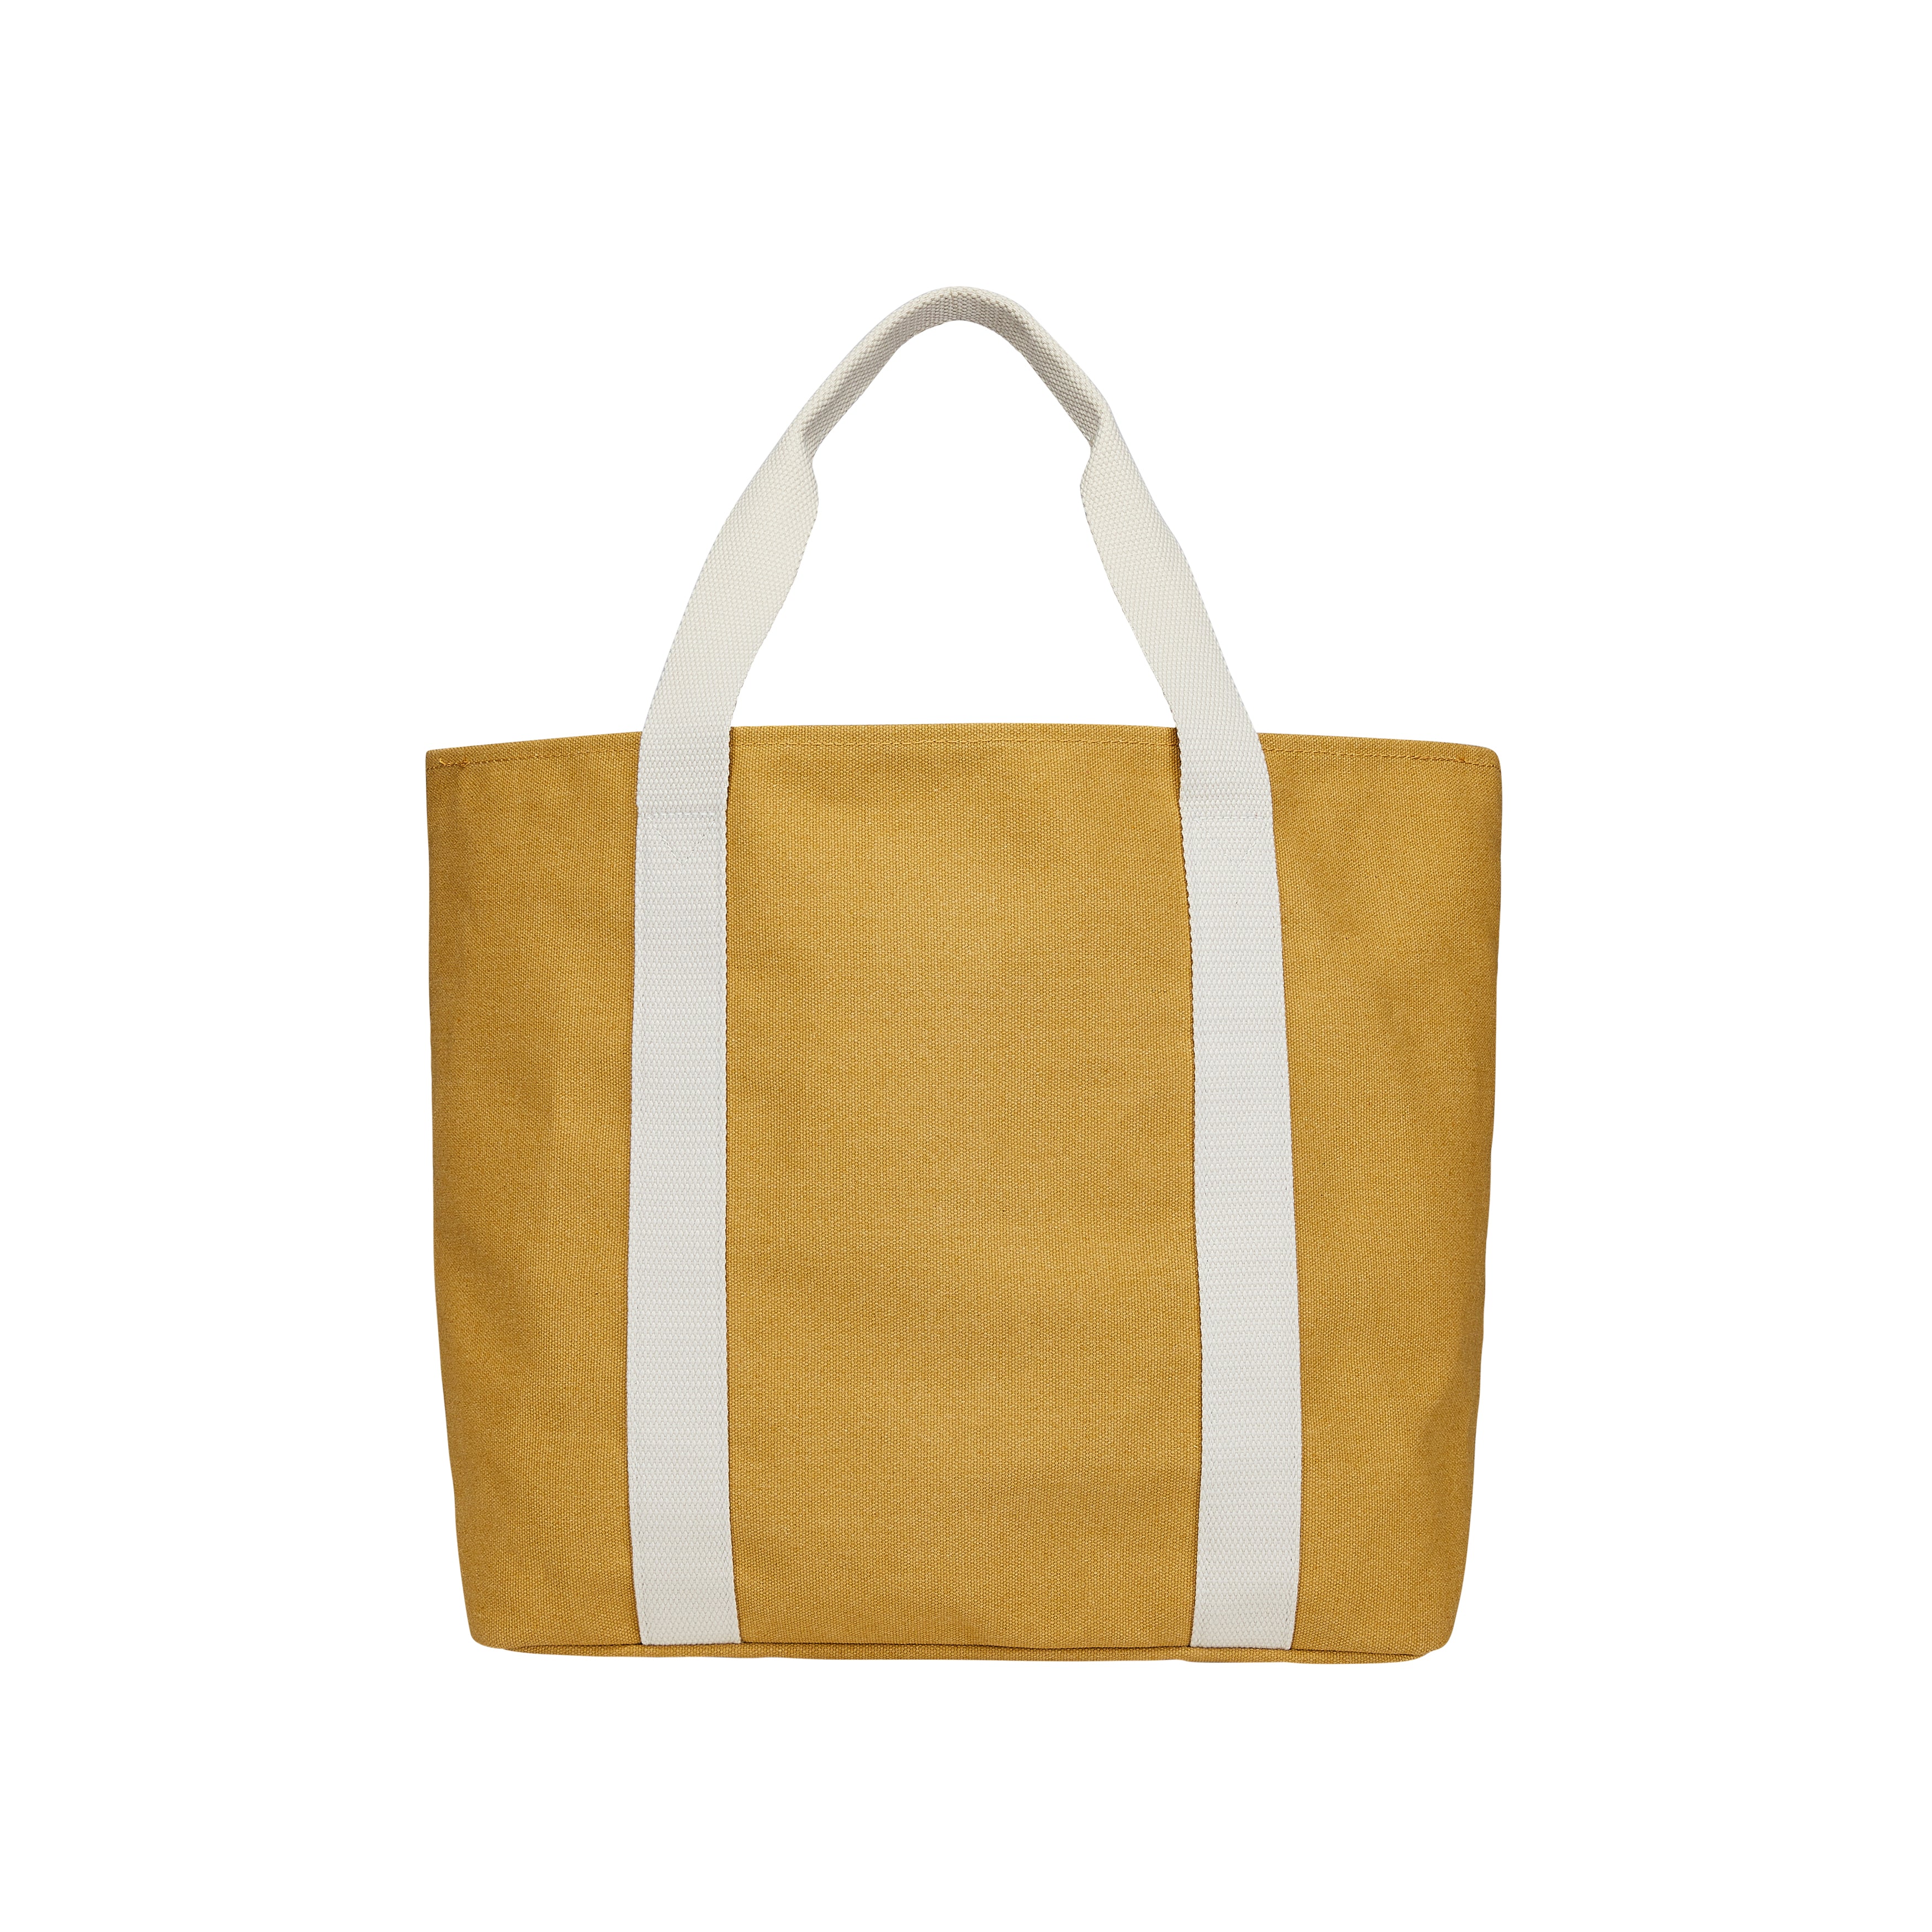 Basic Tote | For when you just need a tote